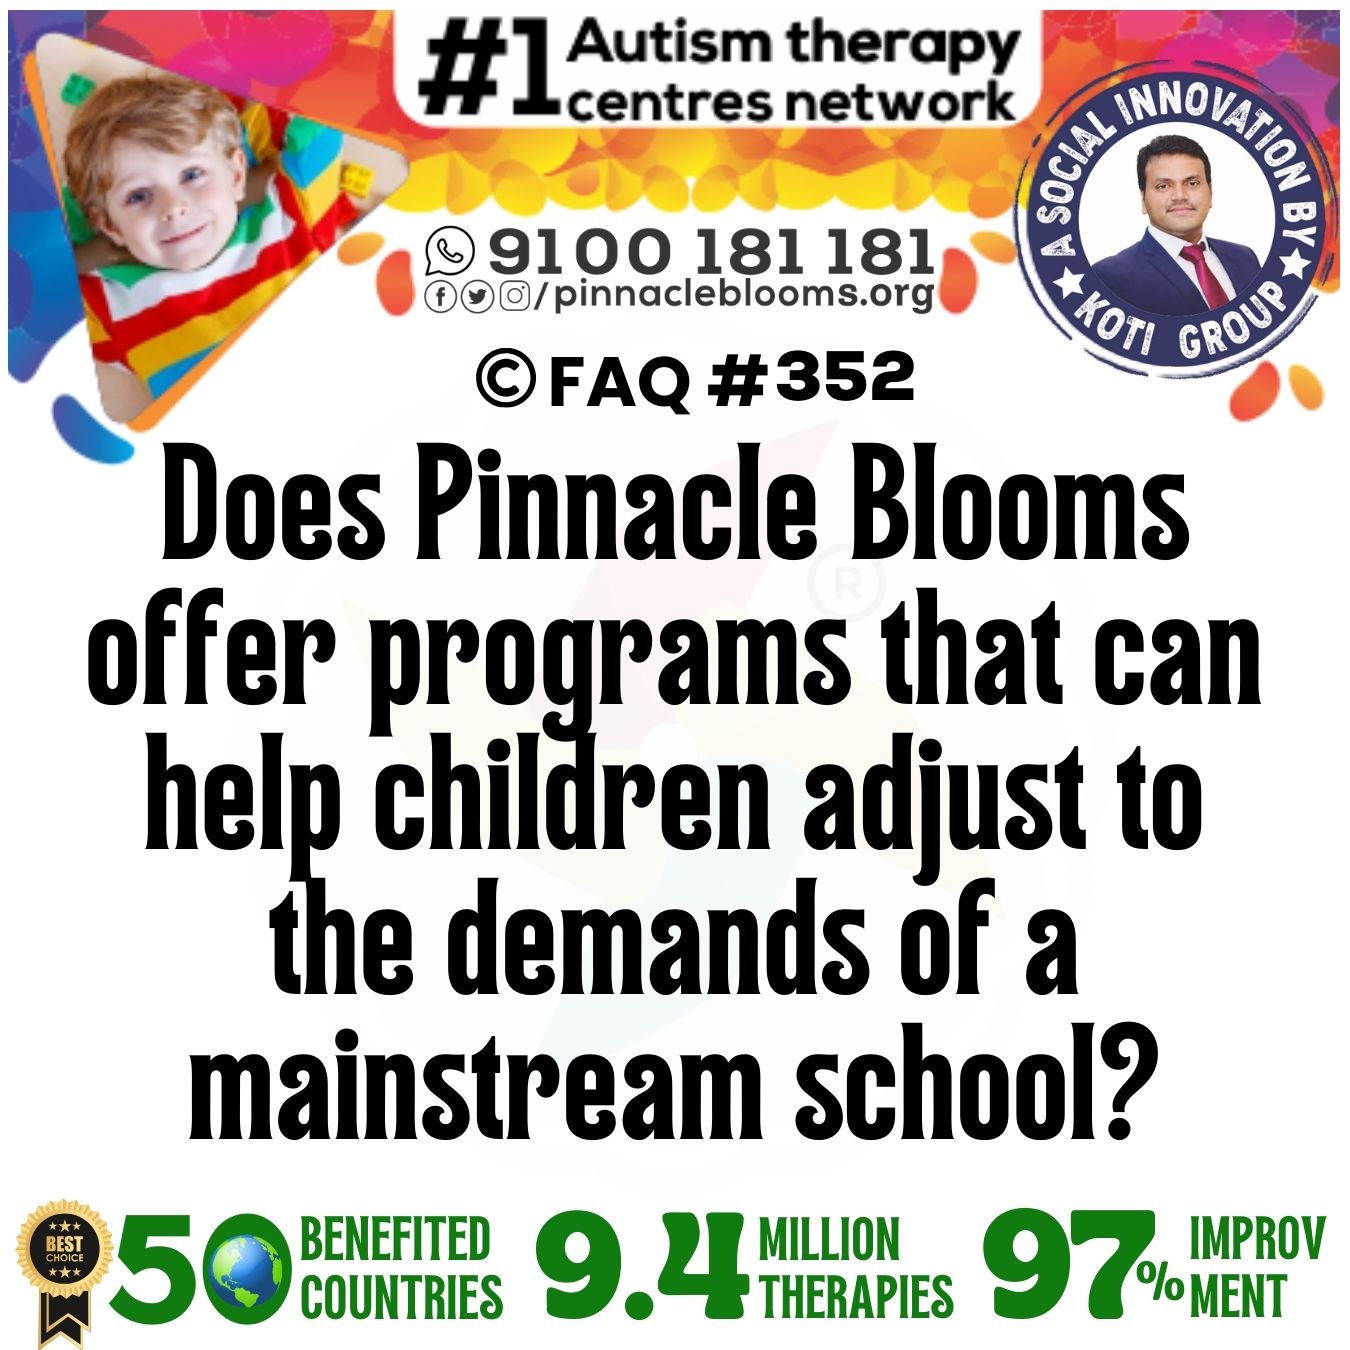 Does Pinnacle Blooms offer programs that can help children adjust to the demands of a mainstream school?